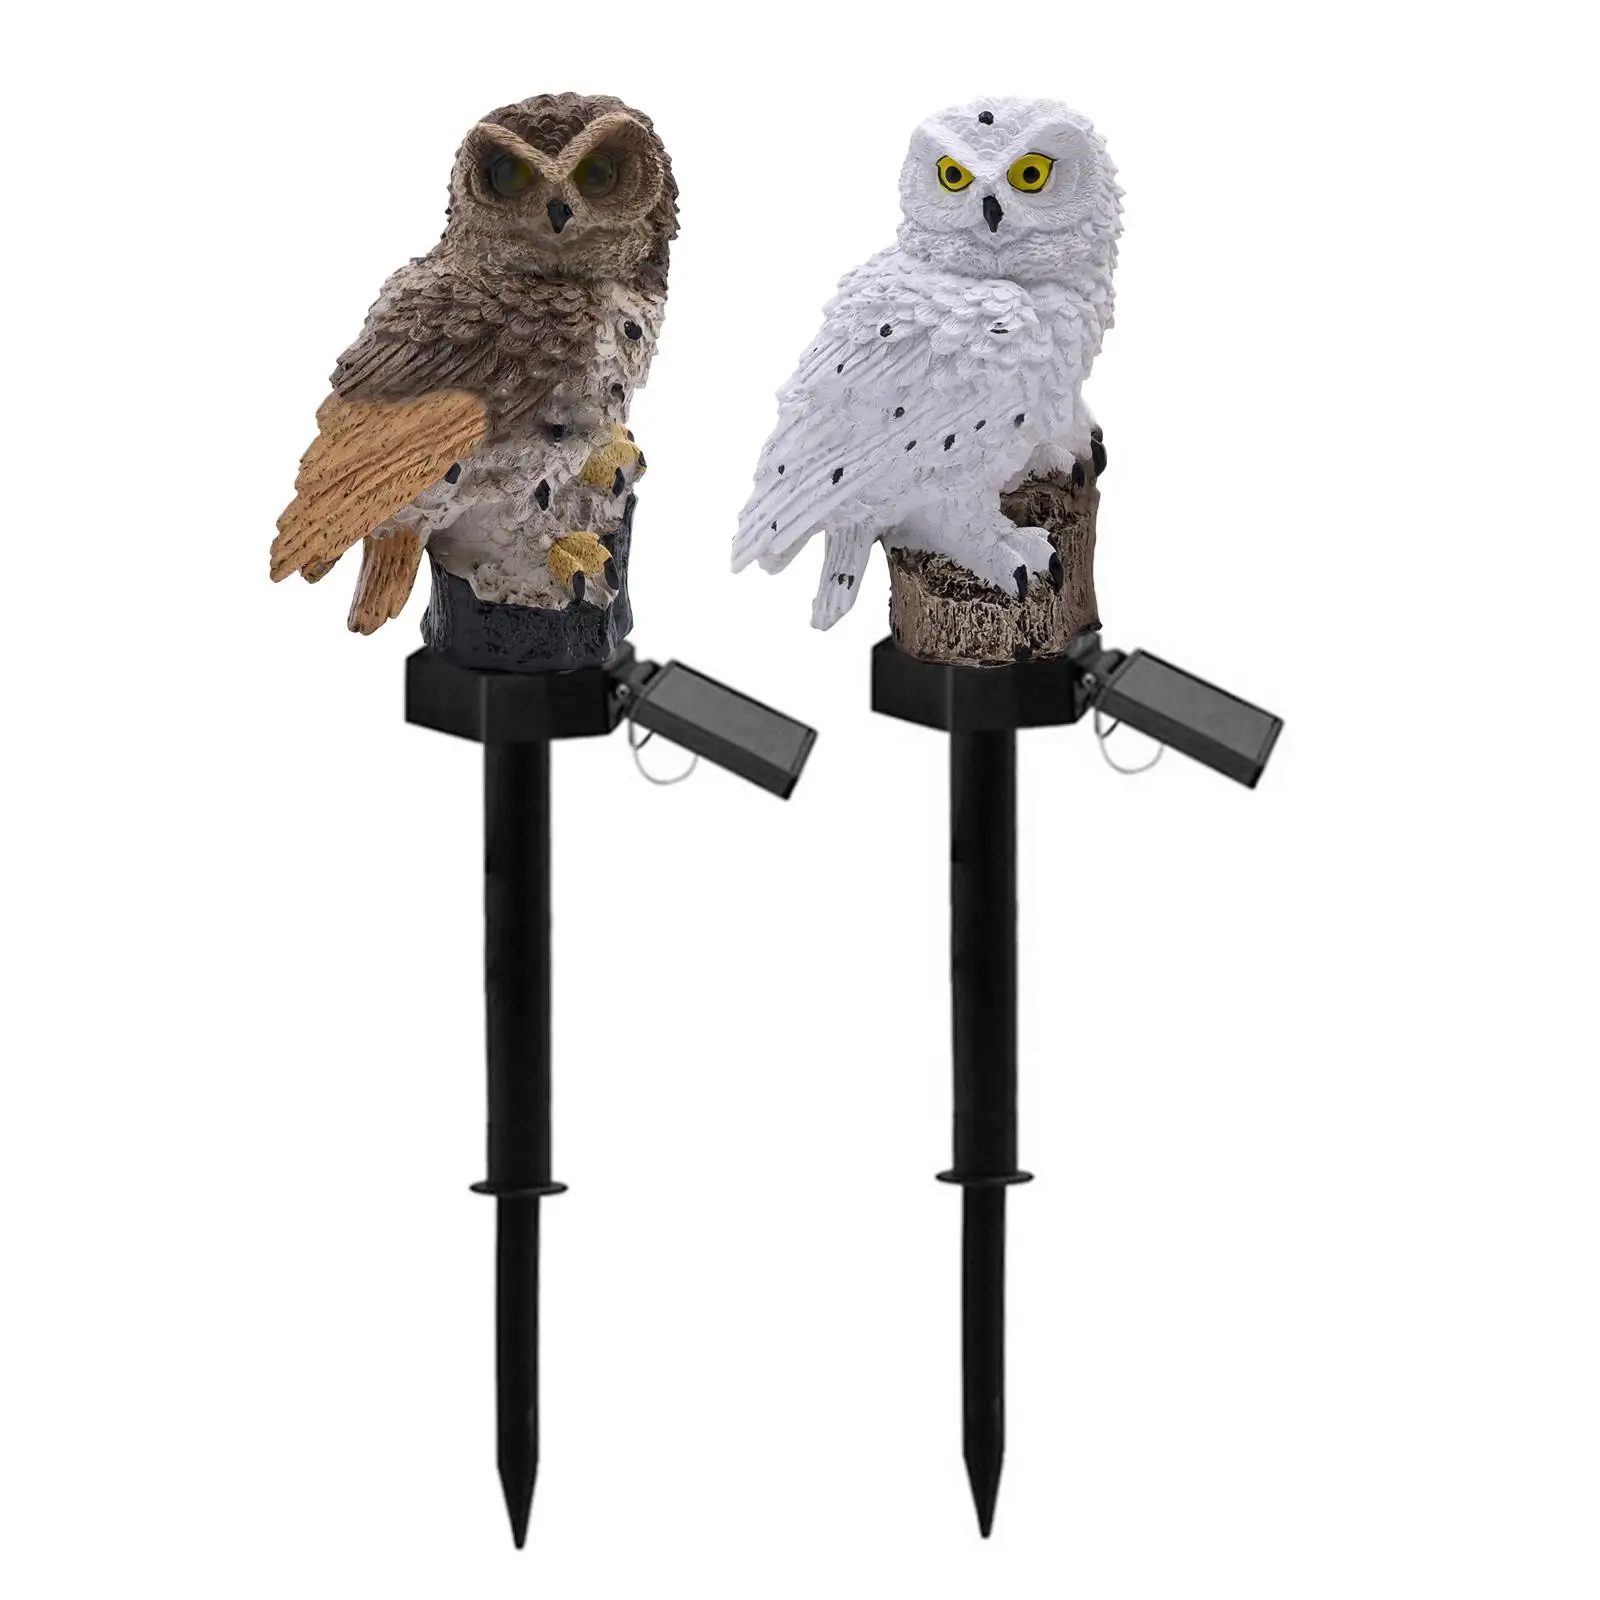 Owl Shape Lawn Light with Stake Scare Birds Away Resin Waterproof Landscape Lamp for Outdoor Lighting Ornament Christmas Garden